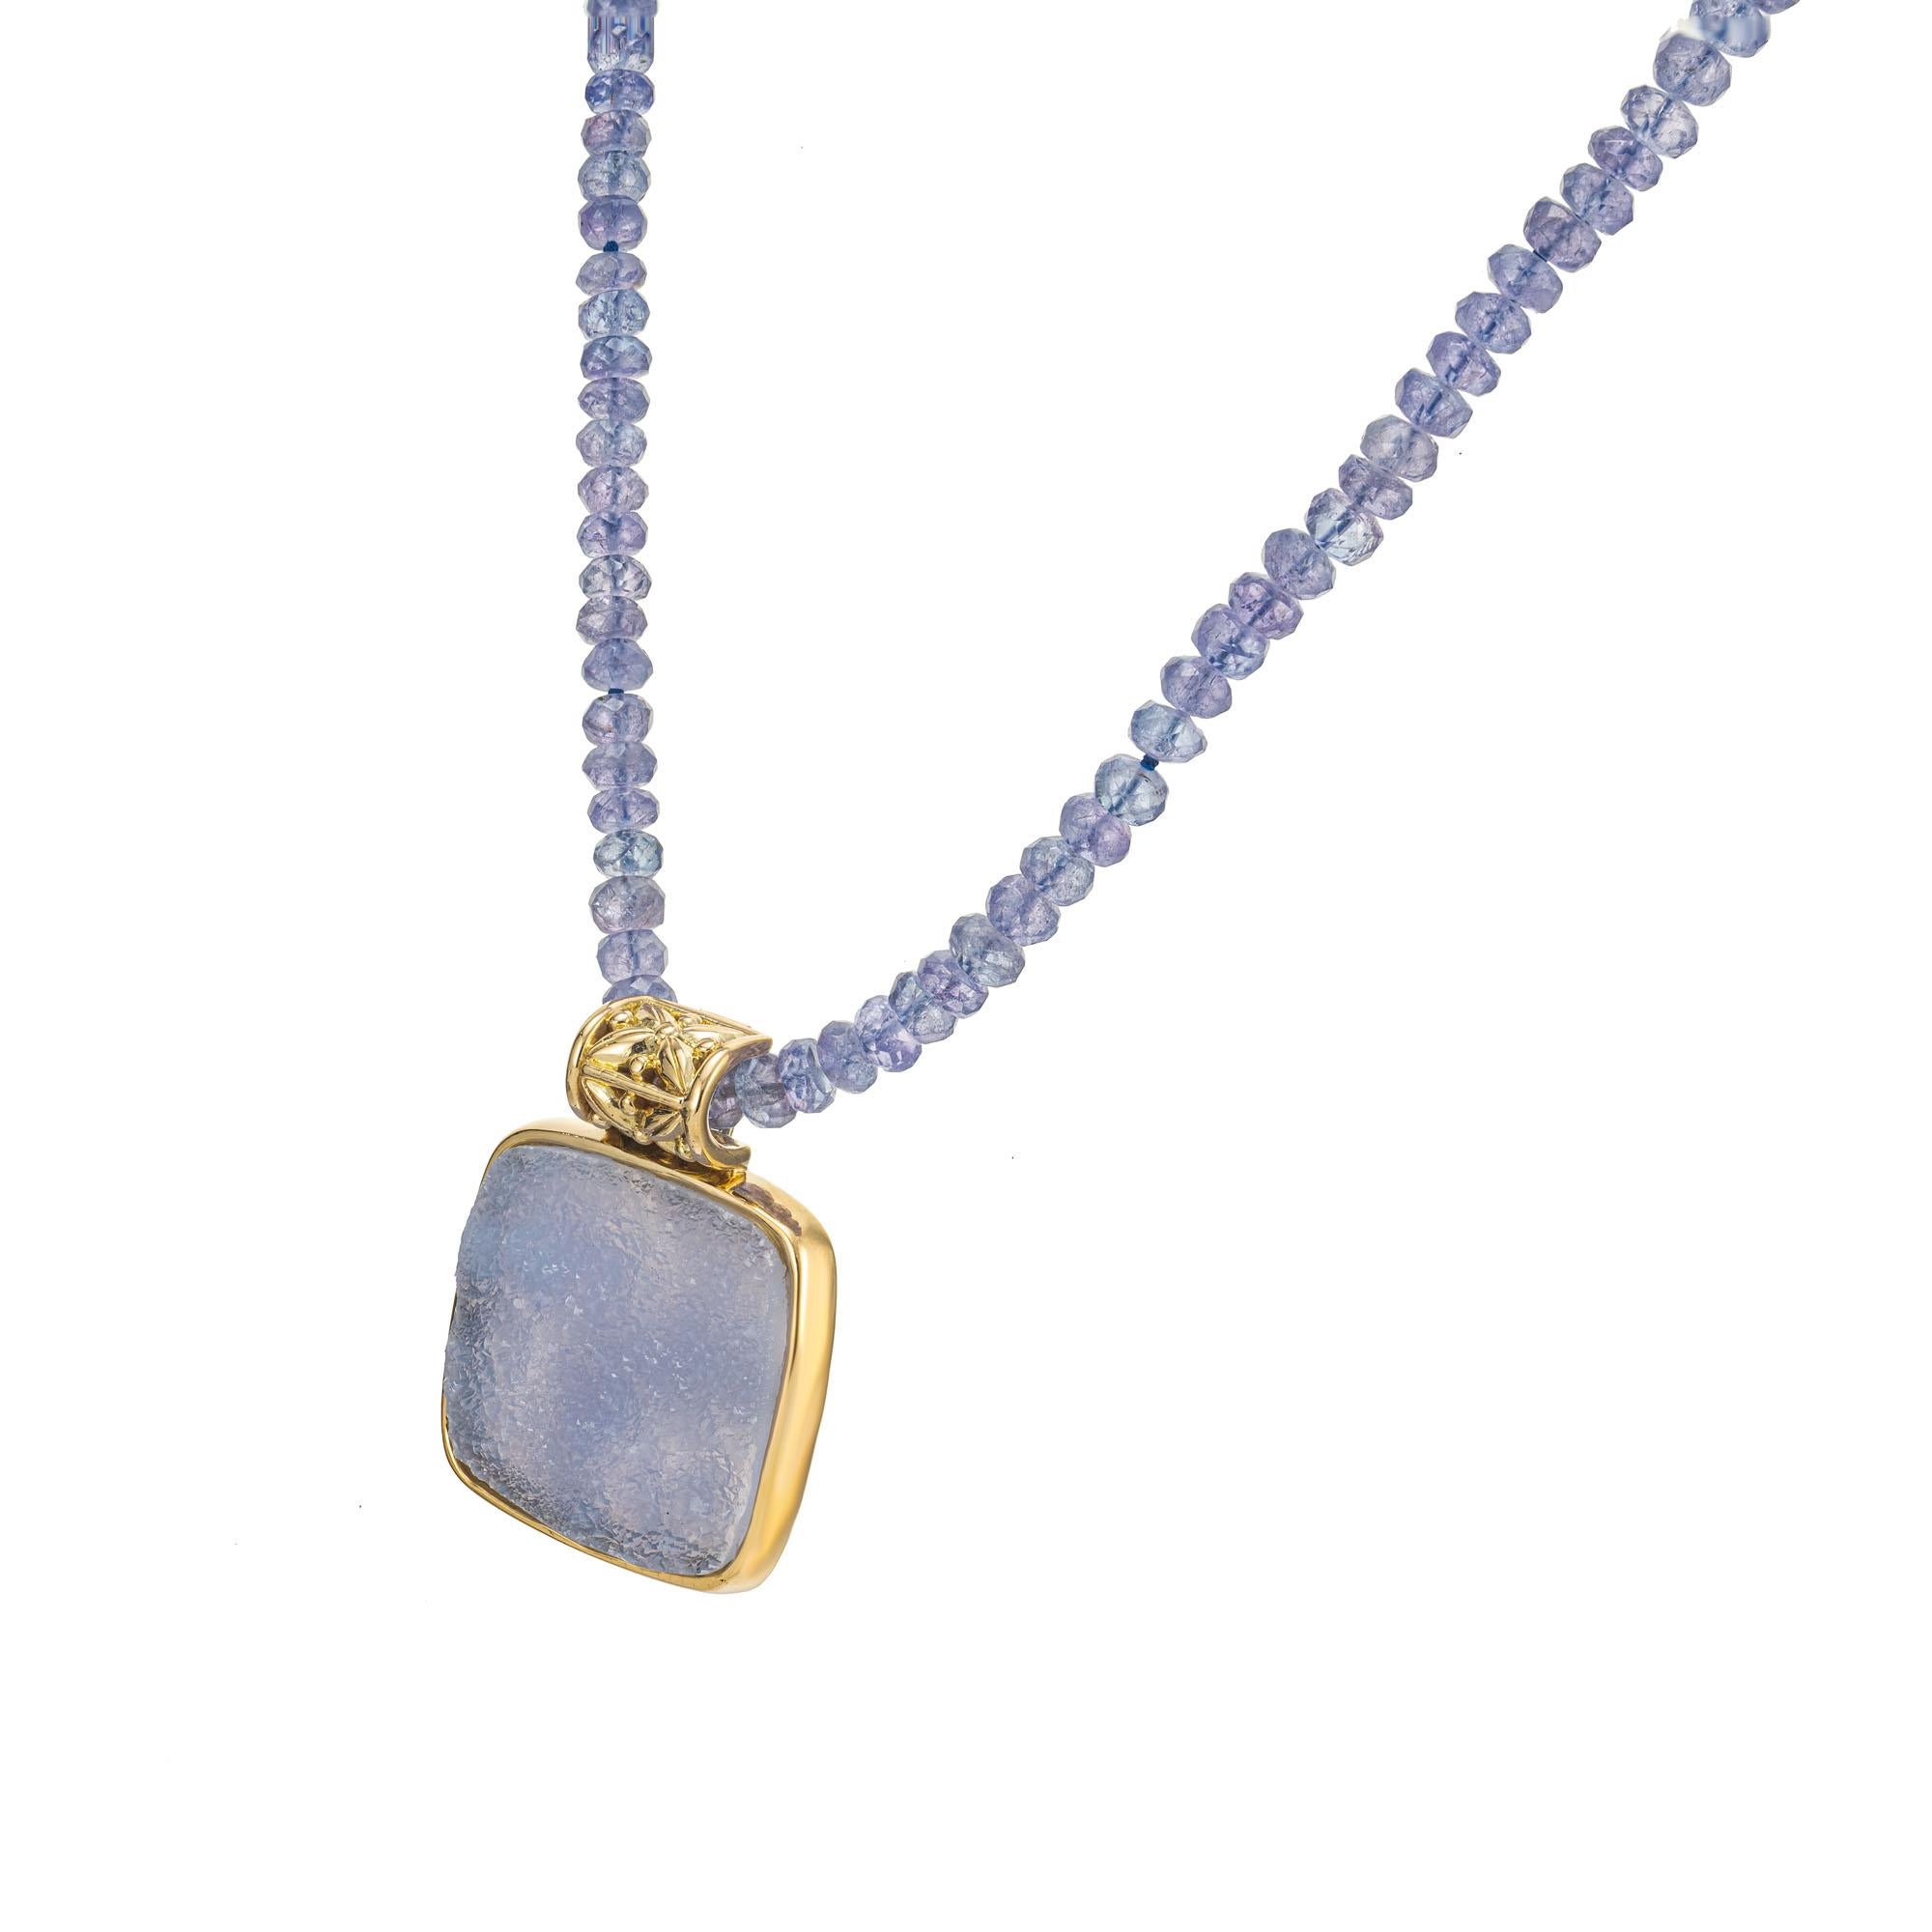 Blue druzy quartz crystal in an 18k yellow gold frame with enhancer bail on a strand of faceted tanzanite beads with a toggle catch. 17 inches long. 

1 square slab periwinkle blue quartz, approx. 13.00cts
145 tanzanite purplish blue faceted beads,